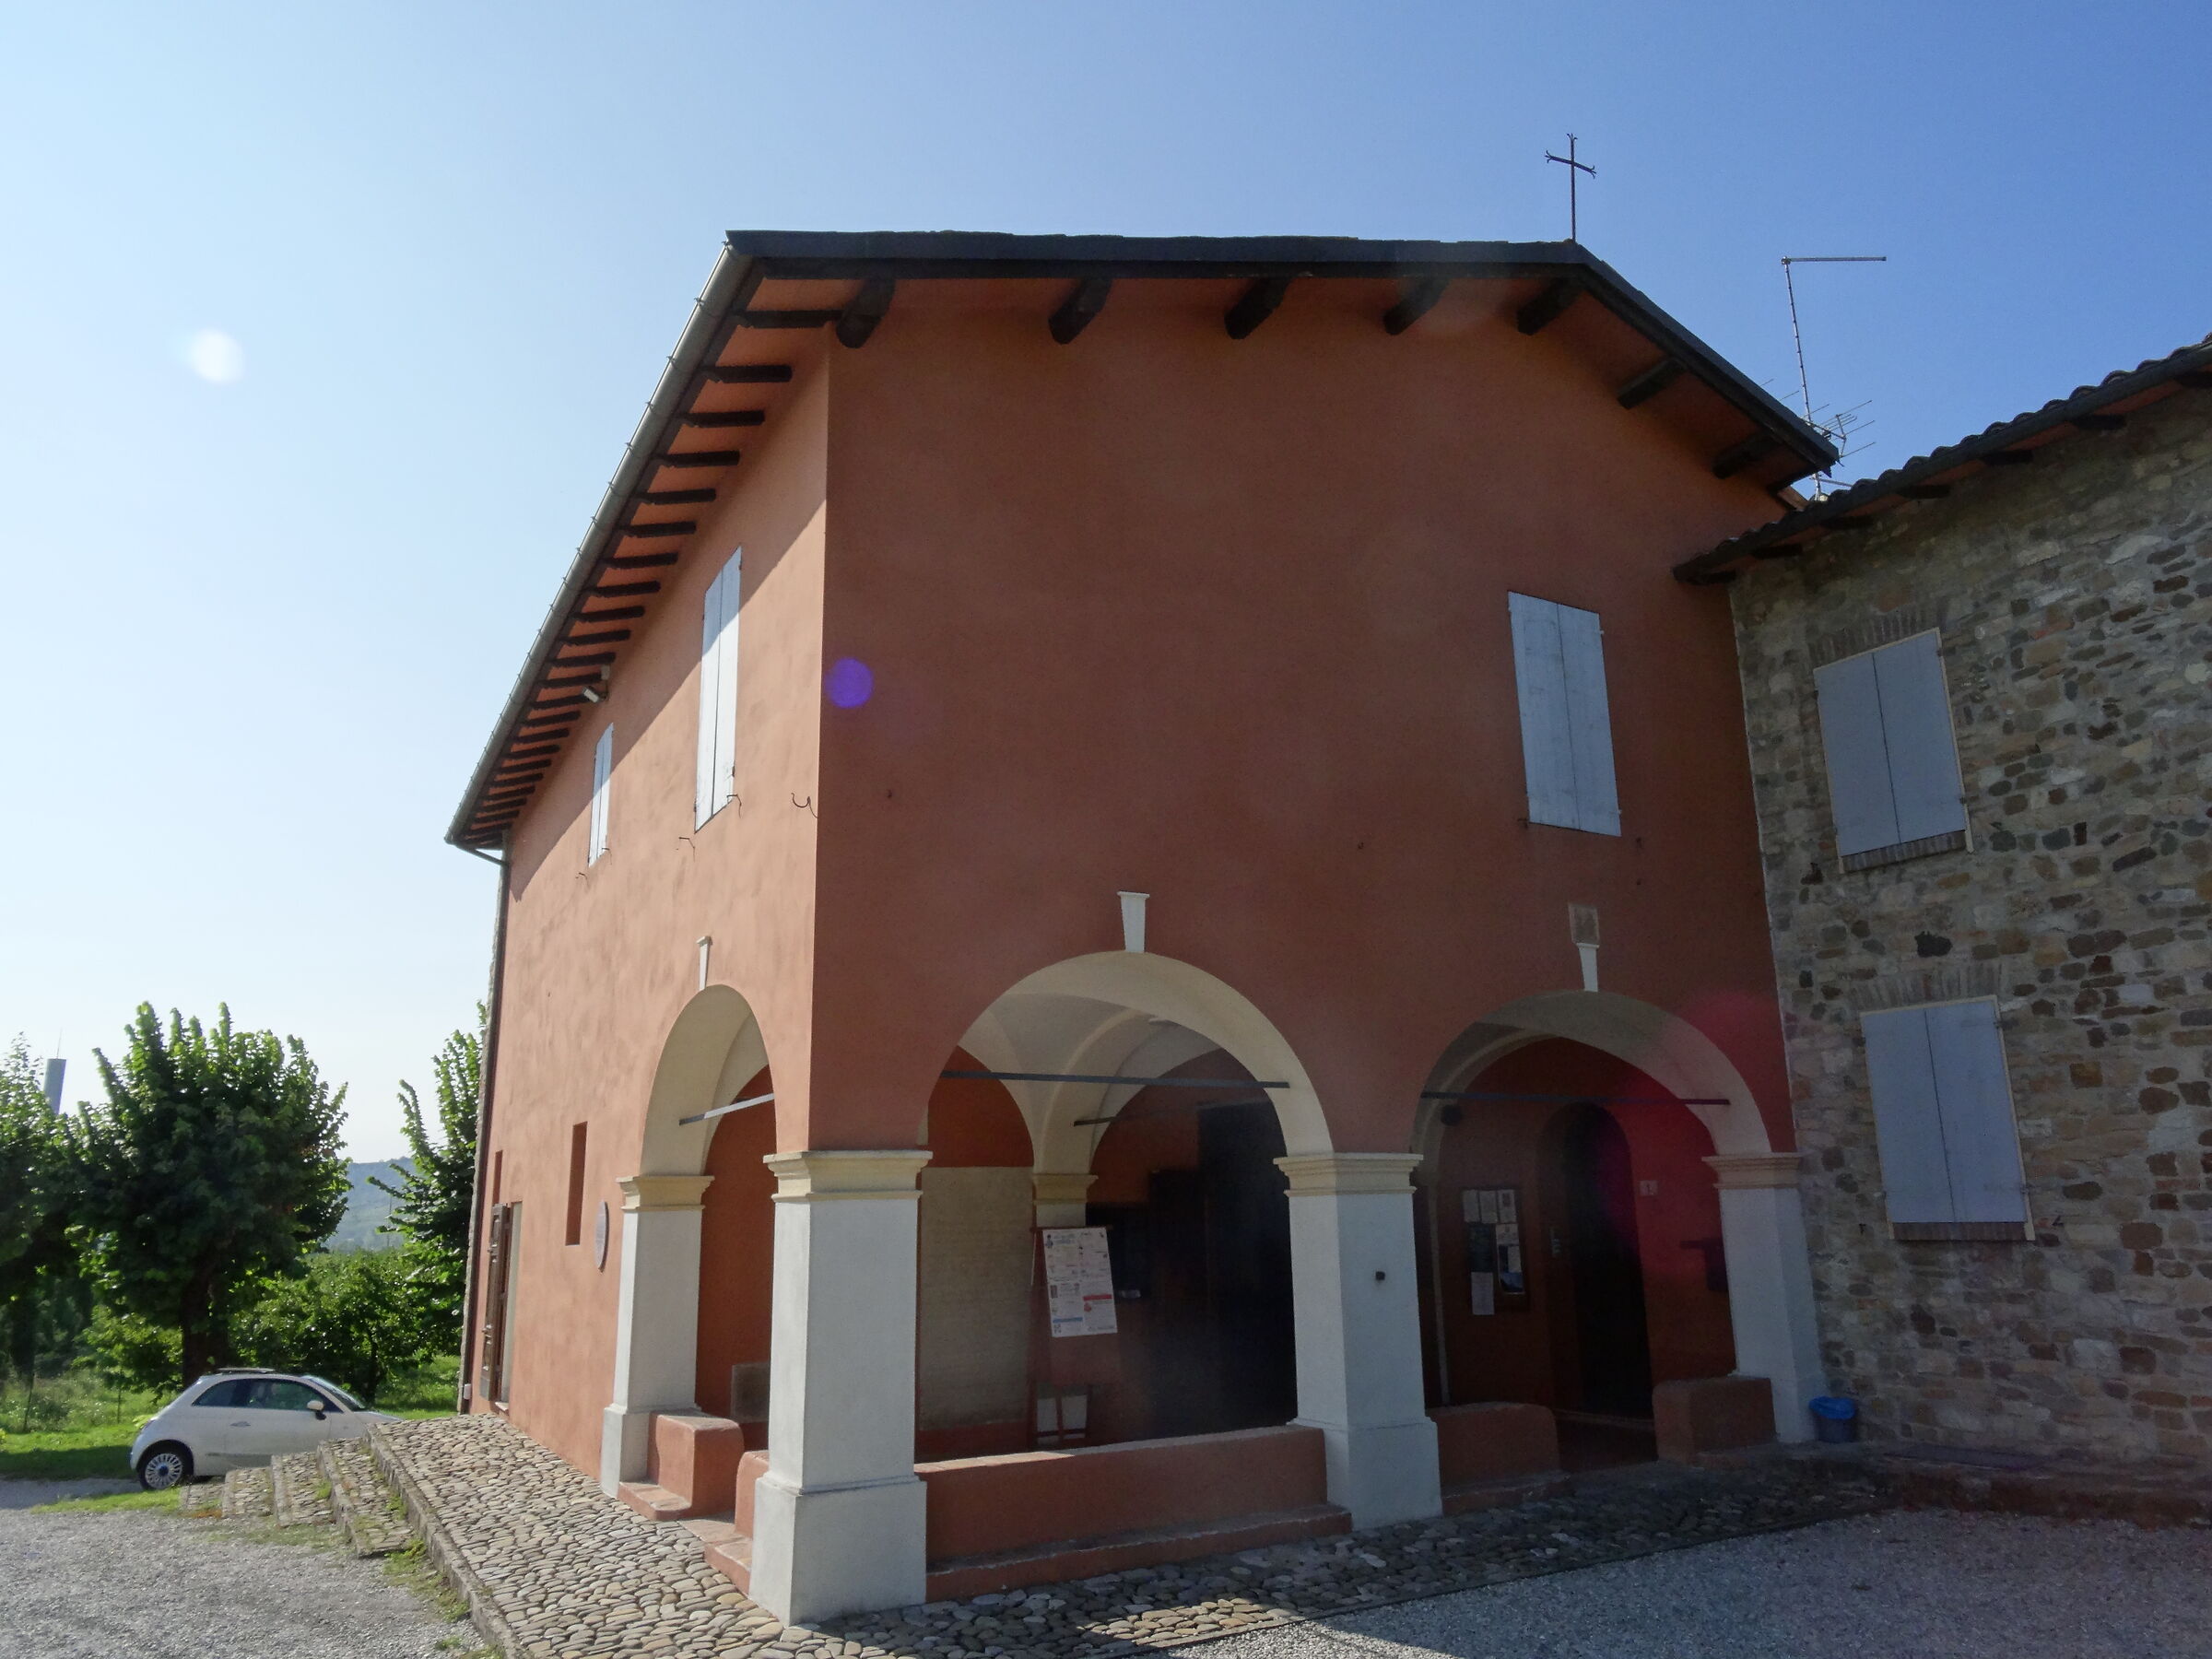 Shrine of Our Lady of the Pieve - Vignola (MO) 2...